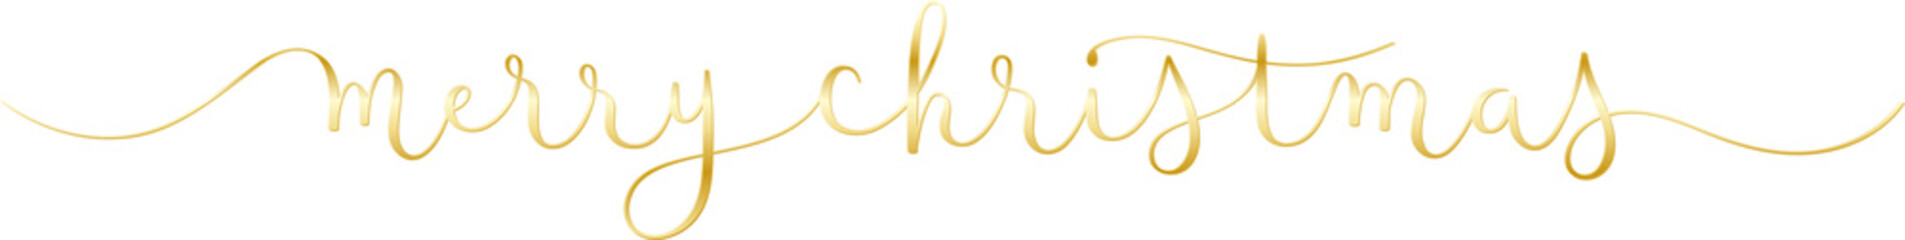 MERRY CHRISTMAS metallic gold brush calligraphy banner with swashes on transparent background